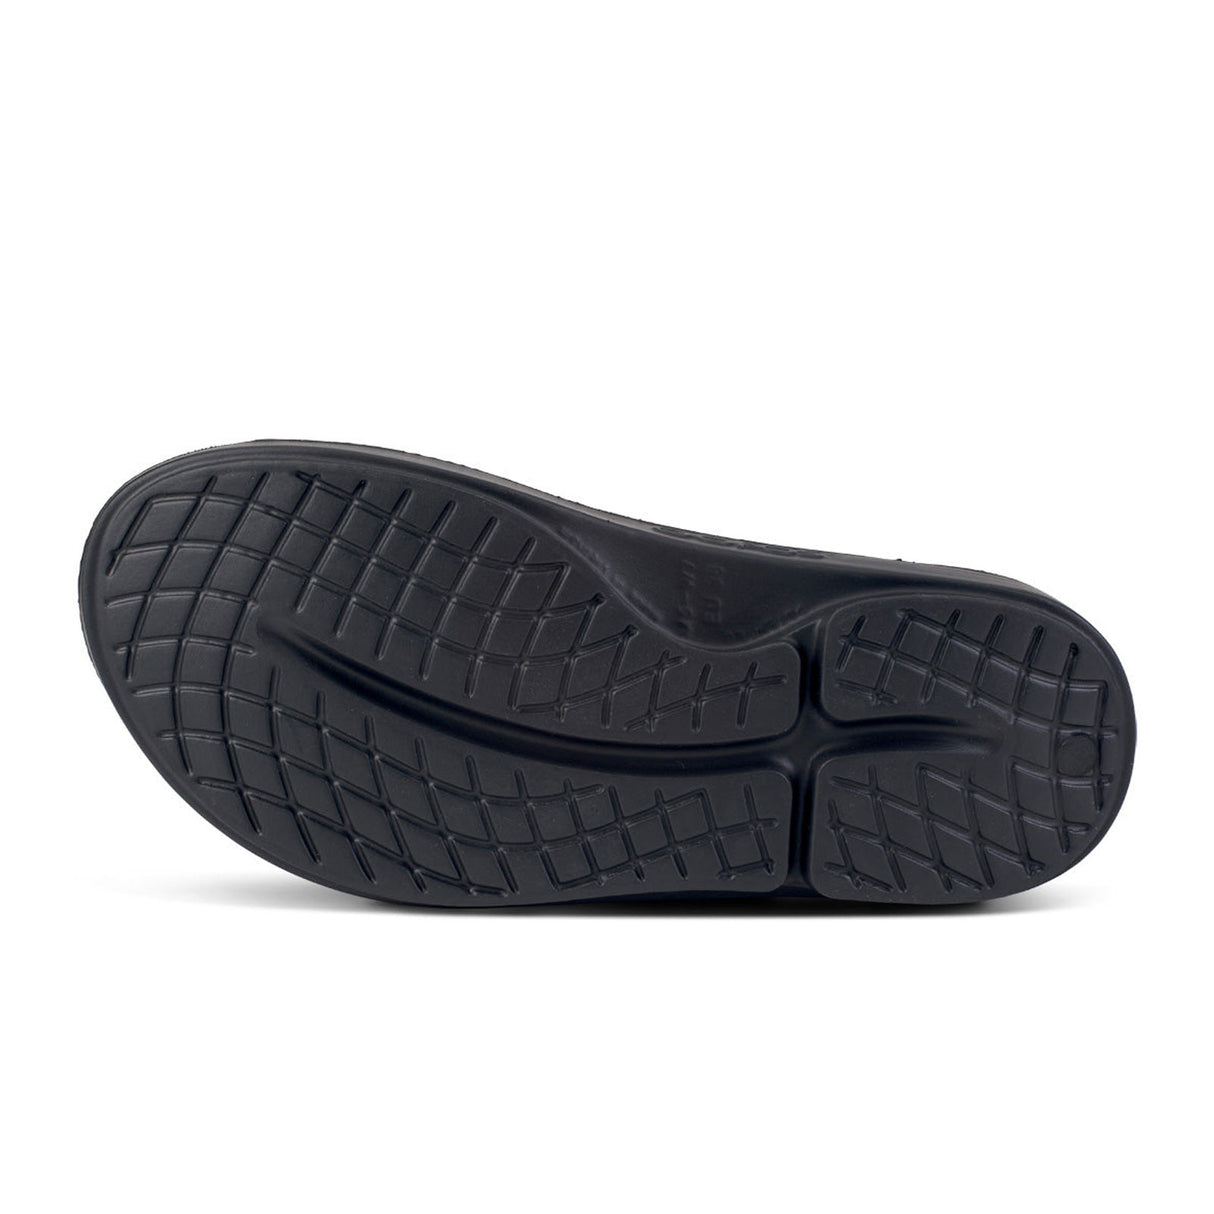 Oofos OOahh Limited Slide (Women) - Canyon Sunlight Sandals - Slide - The Heel Shoe Fitters